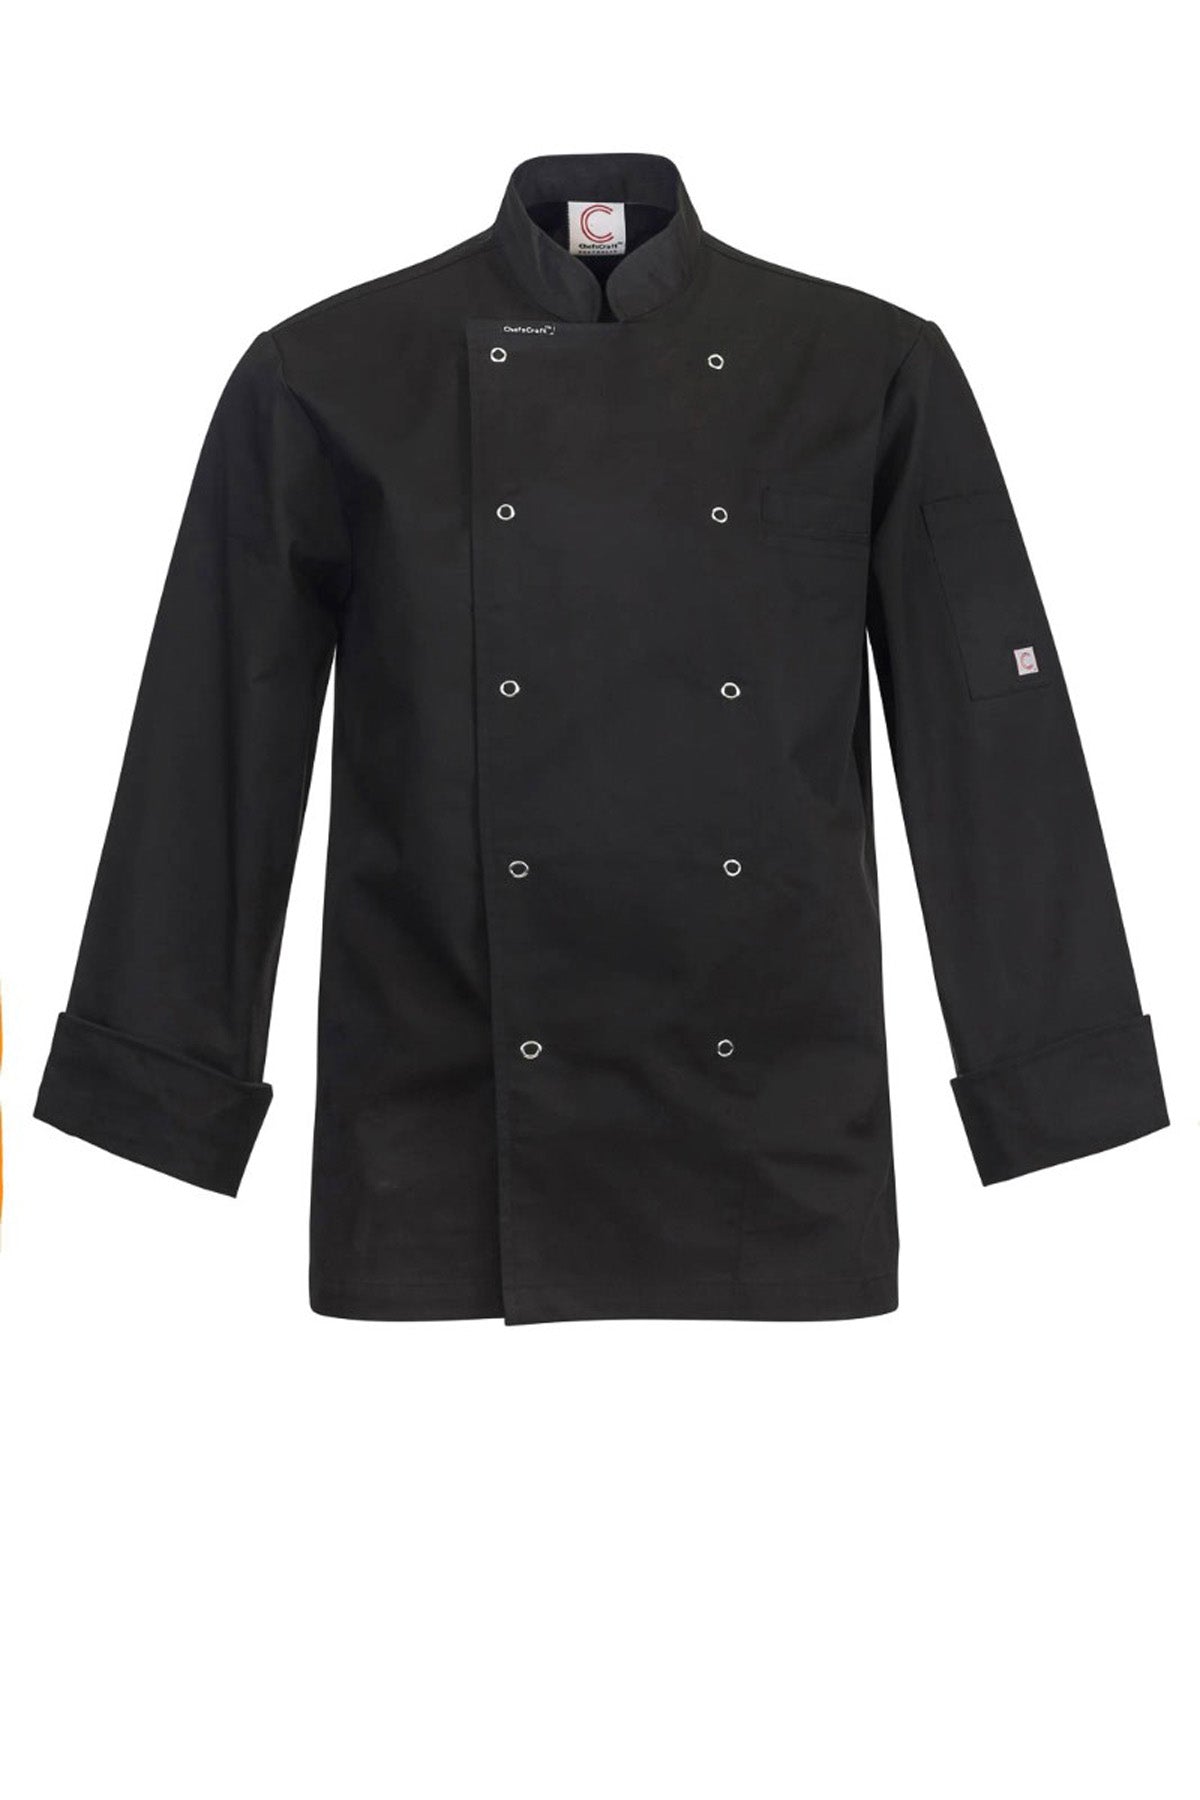 Executive Long Sleeve Chefs Jacket with Press Studs - made by ChefsCraft